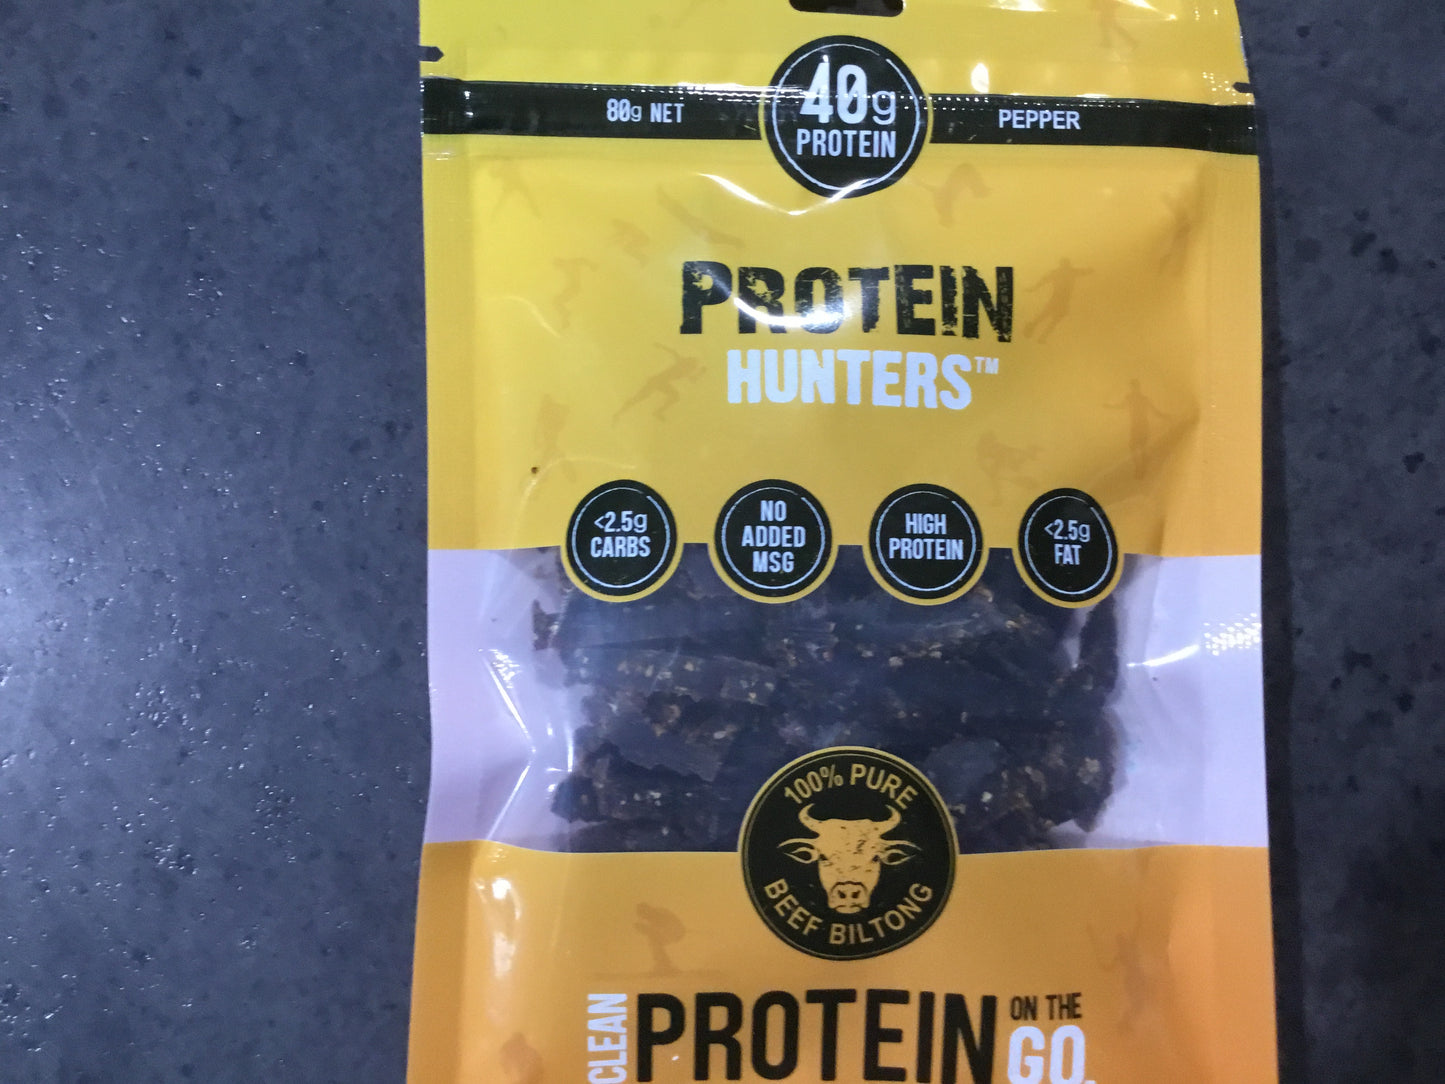 Protein Hunters - Pepper 100g